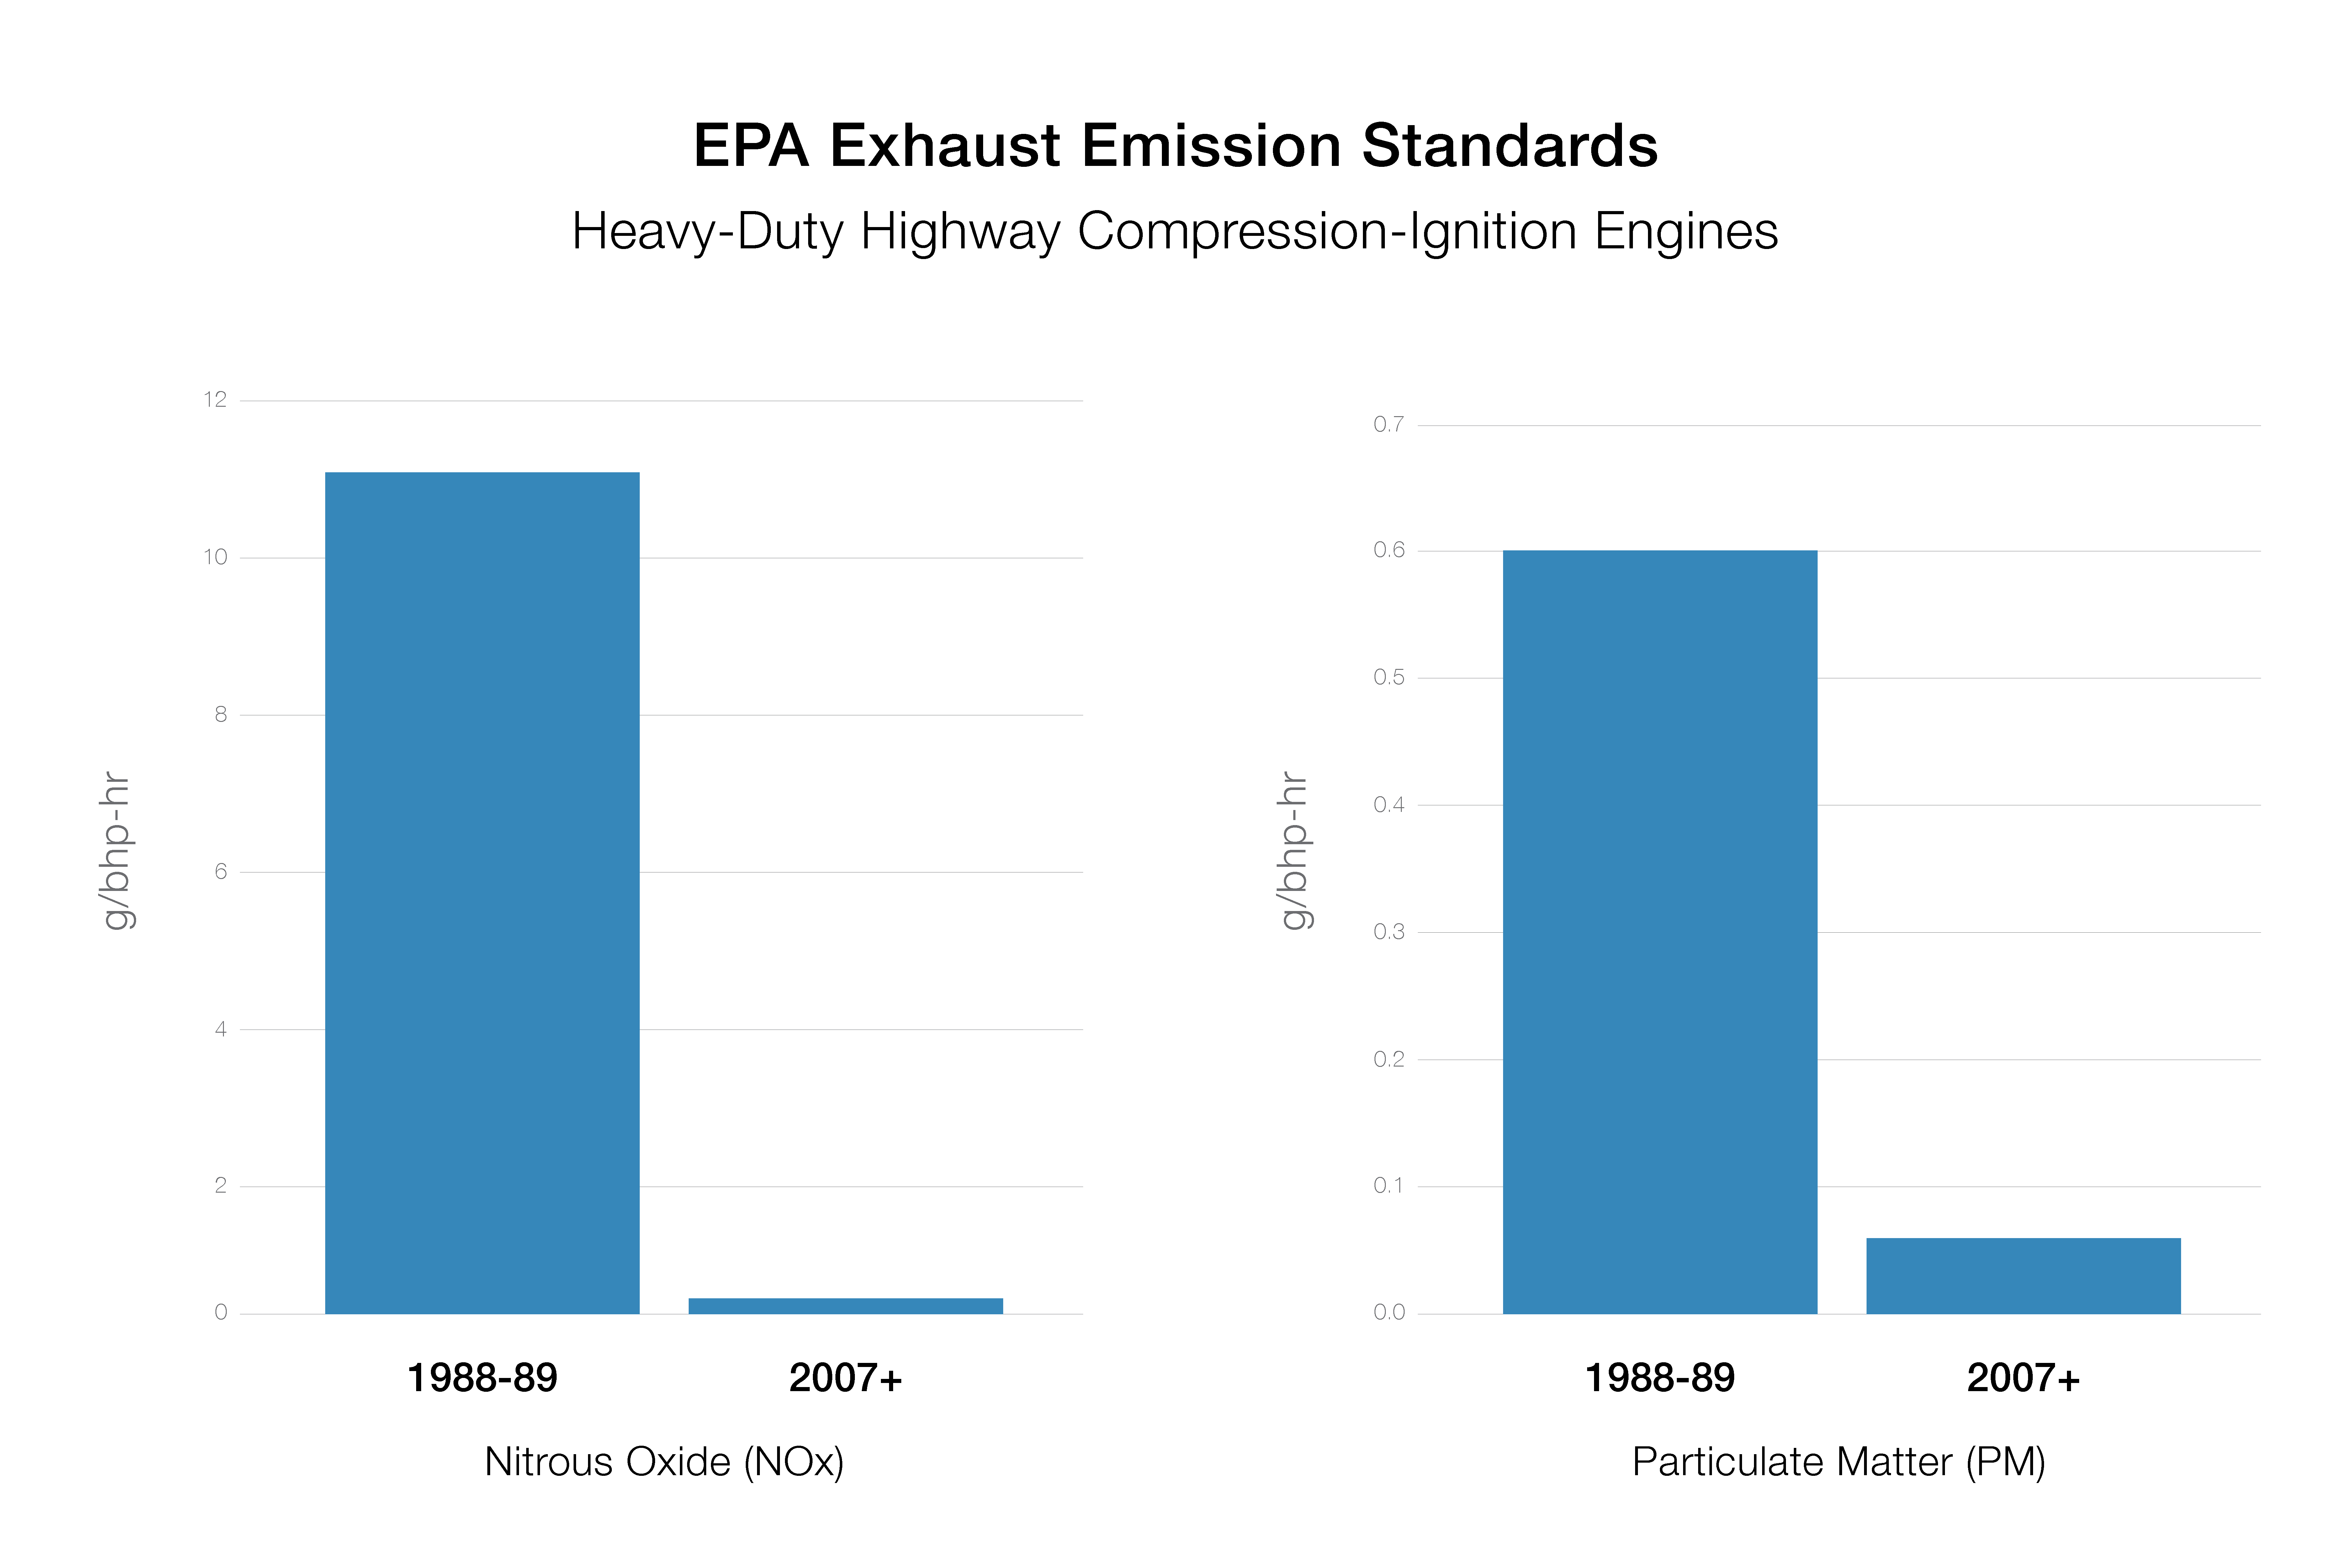 A chart that showcases the progress made in reducing exhaust emissions in heavy-duty highway compression-ignition engines.